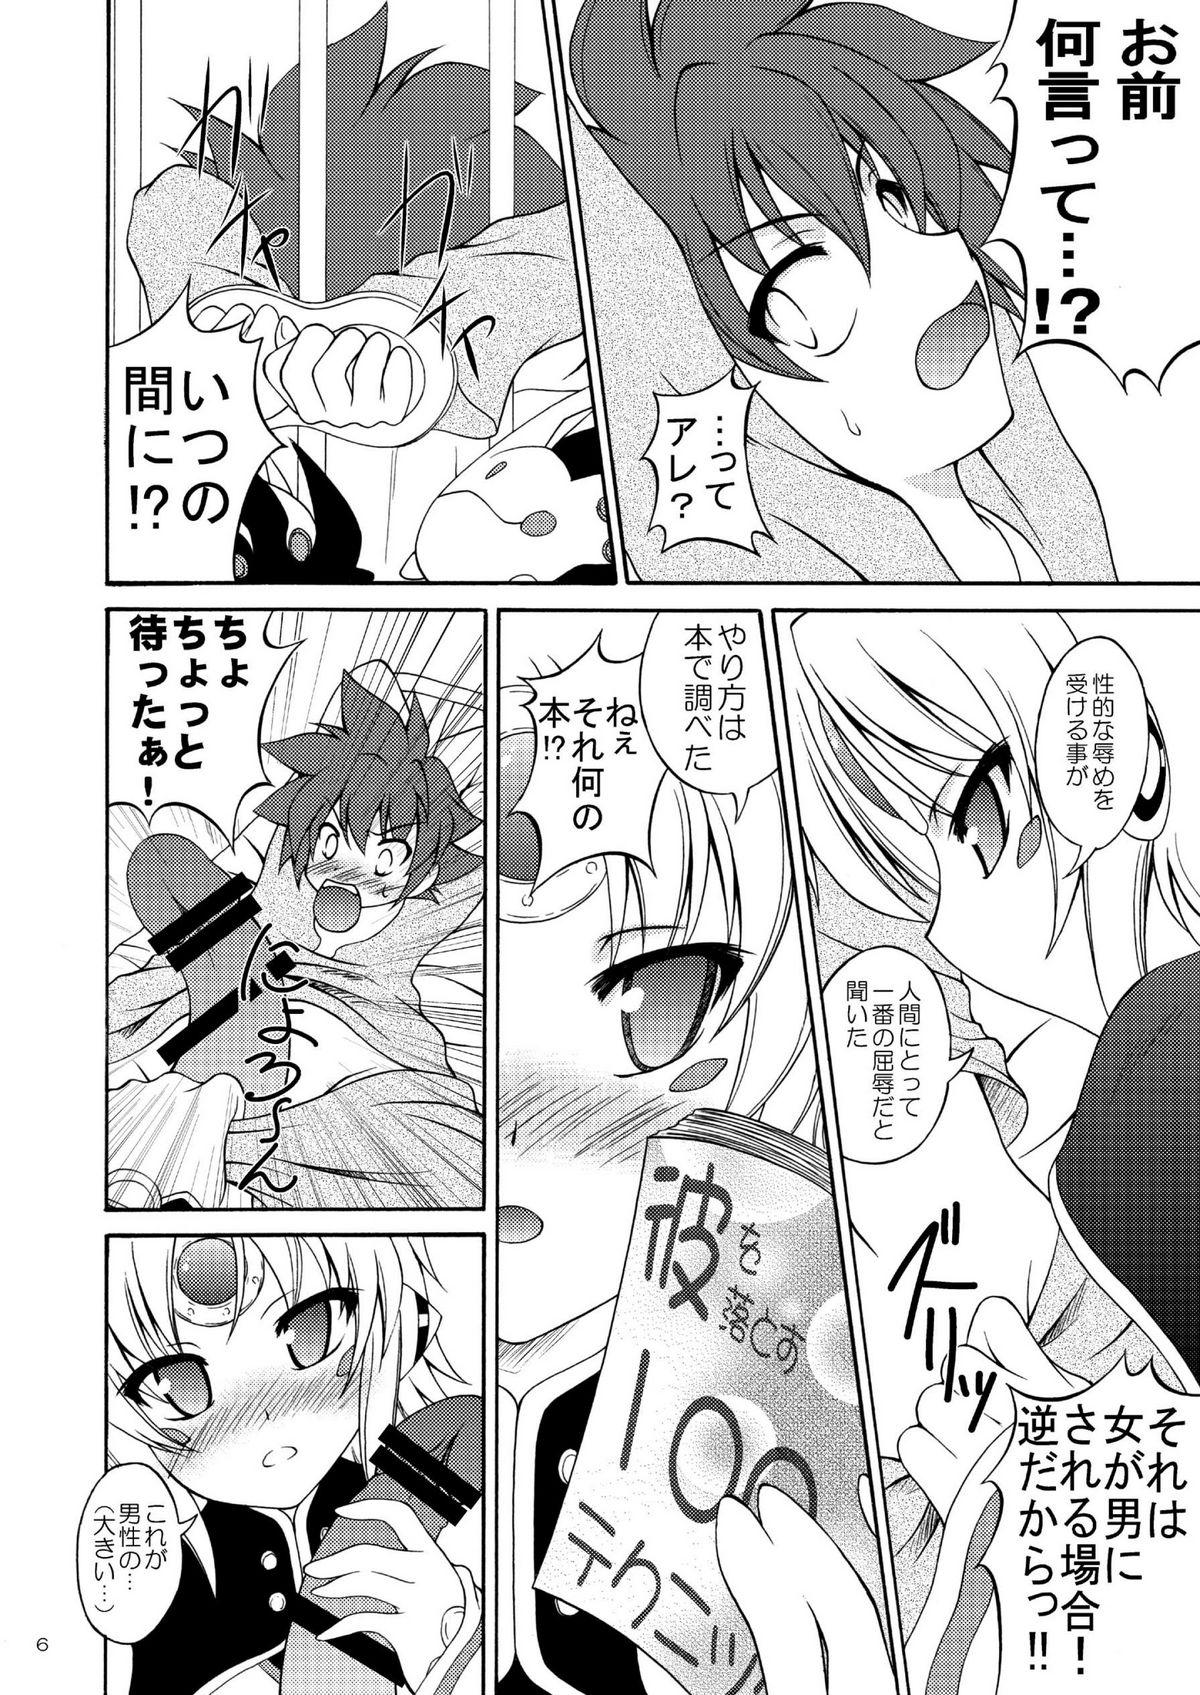 Large E - Elsword Naturaltits - Page 6